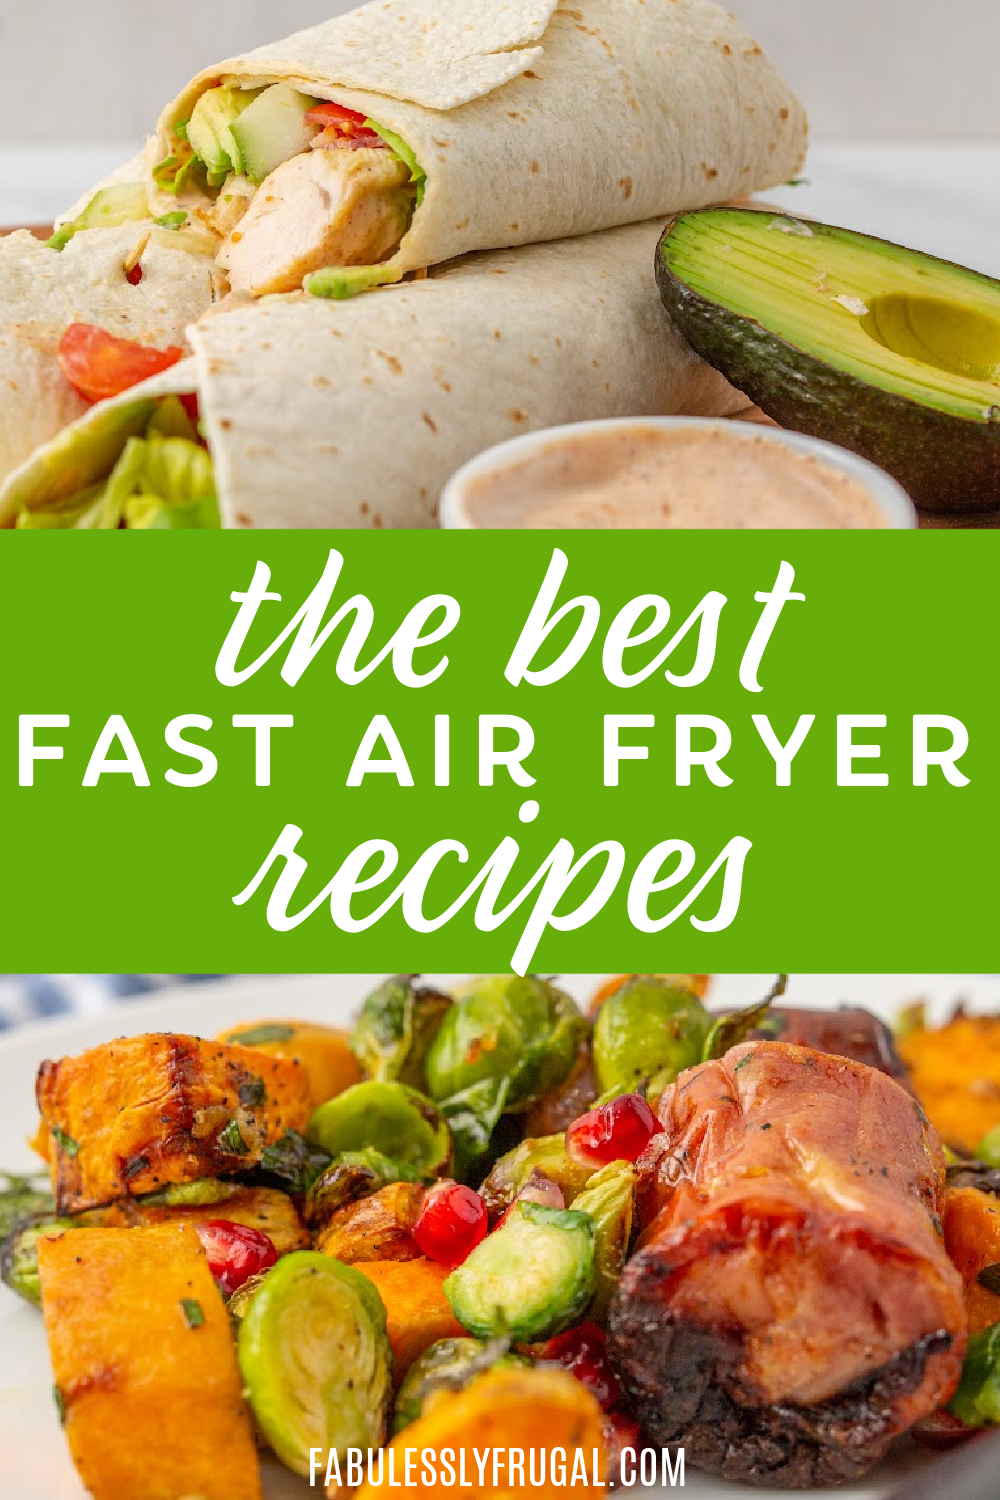 https://fabulesslyfrugal.com/wp-content/uploads/2021/12/fast-and-easy-air-fryer-recipes-for-busy-nights-2.png